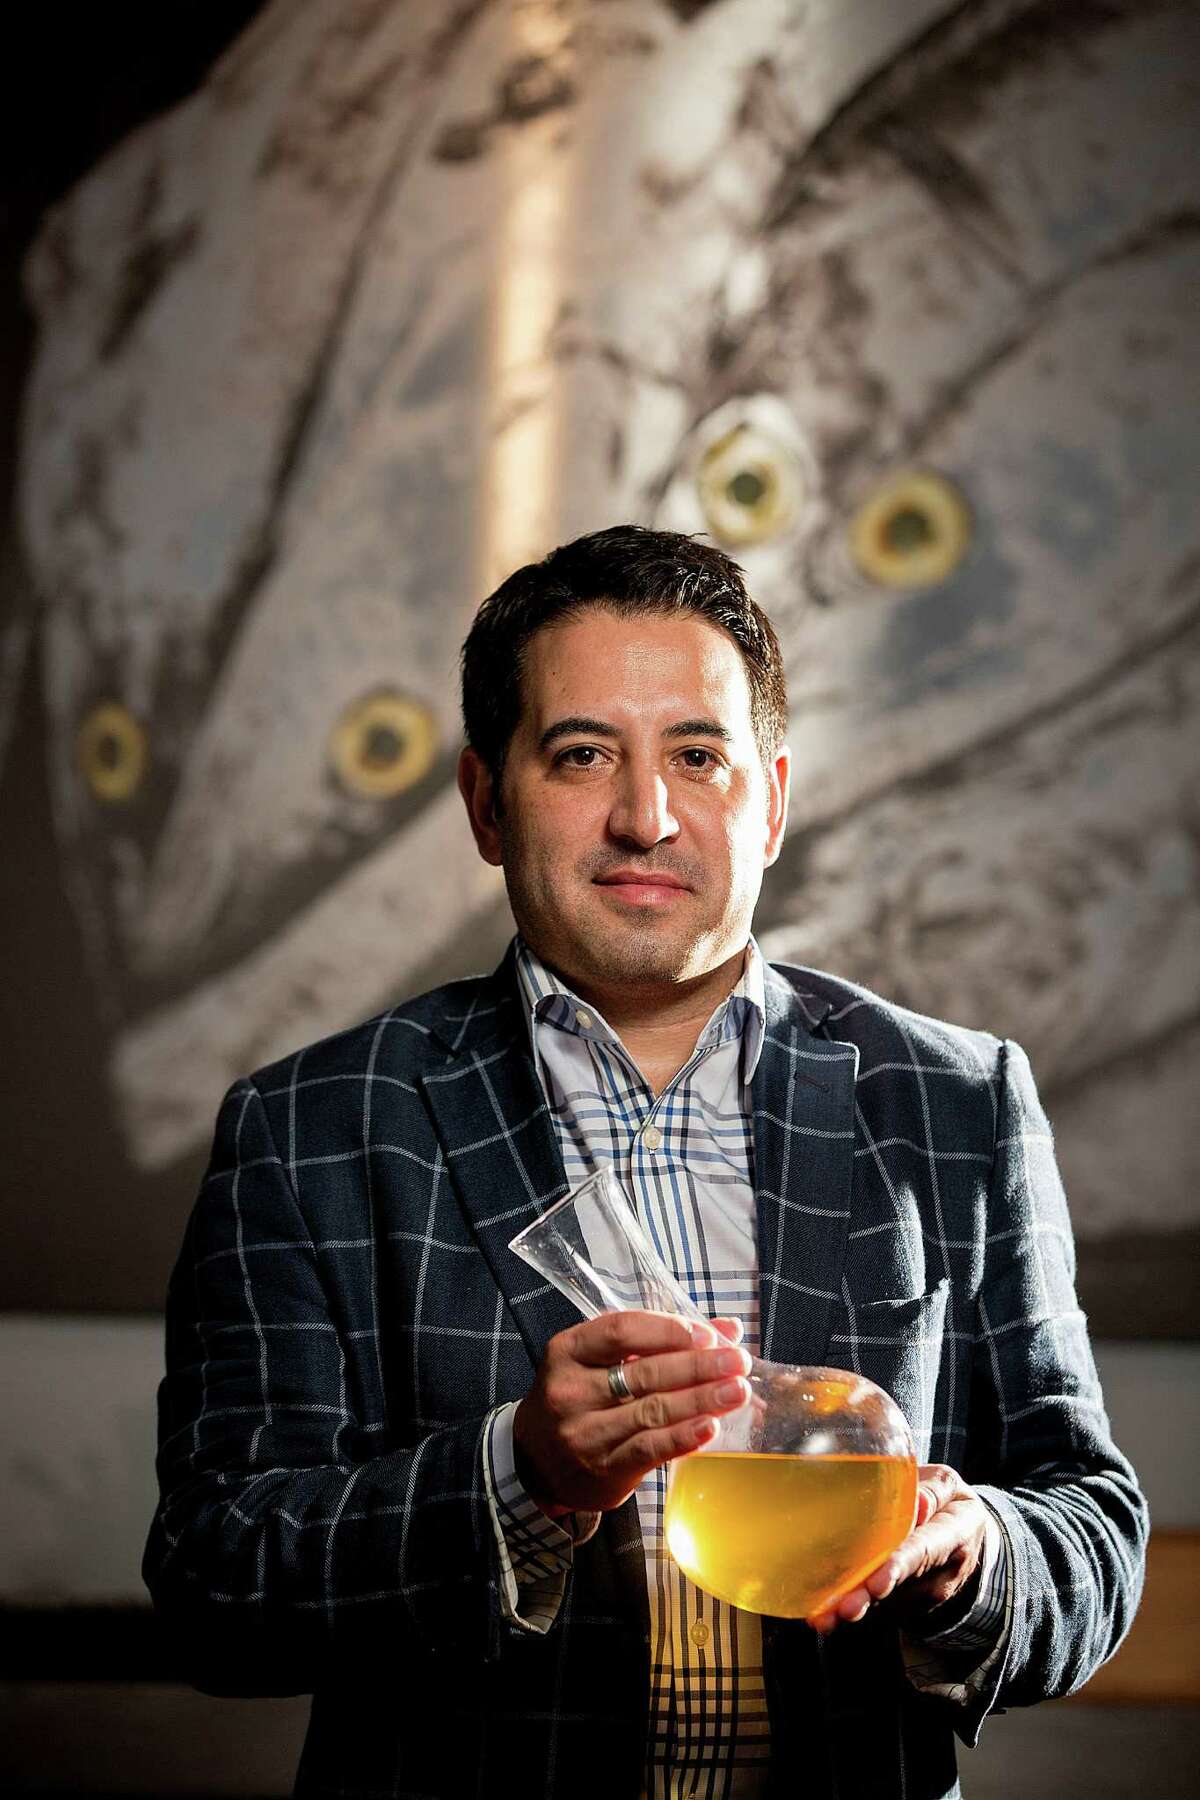 Rob Ortiz, manager and sommelier at Holley's Seafood, suggests Kalin Cellars' 1995 Chardonnay Cuvée LV.